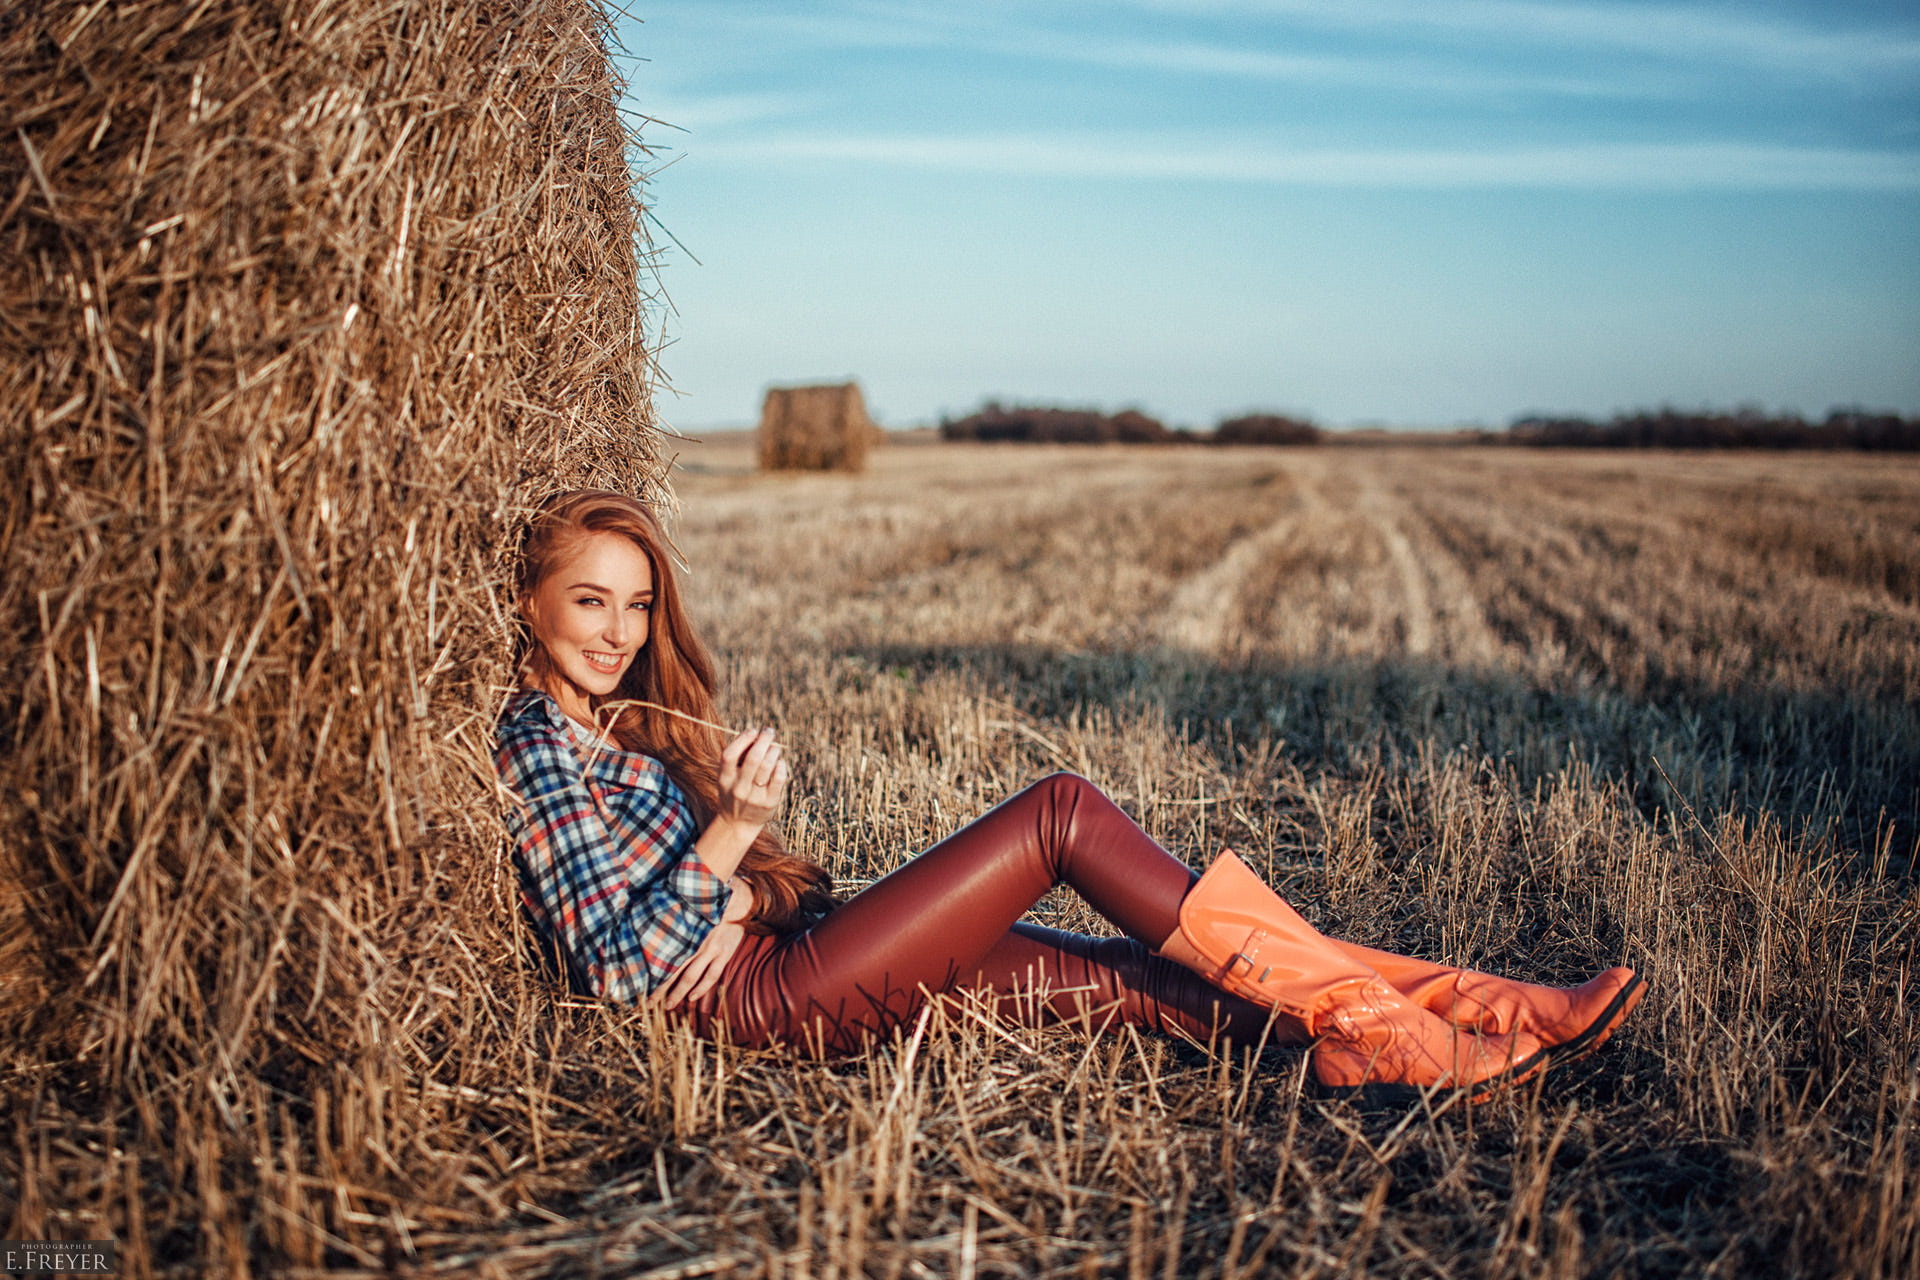 1200x2040 Redhead Women Outdoors In Leather Pants 1200x2040 Resolution ...